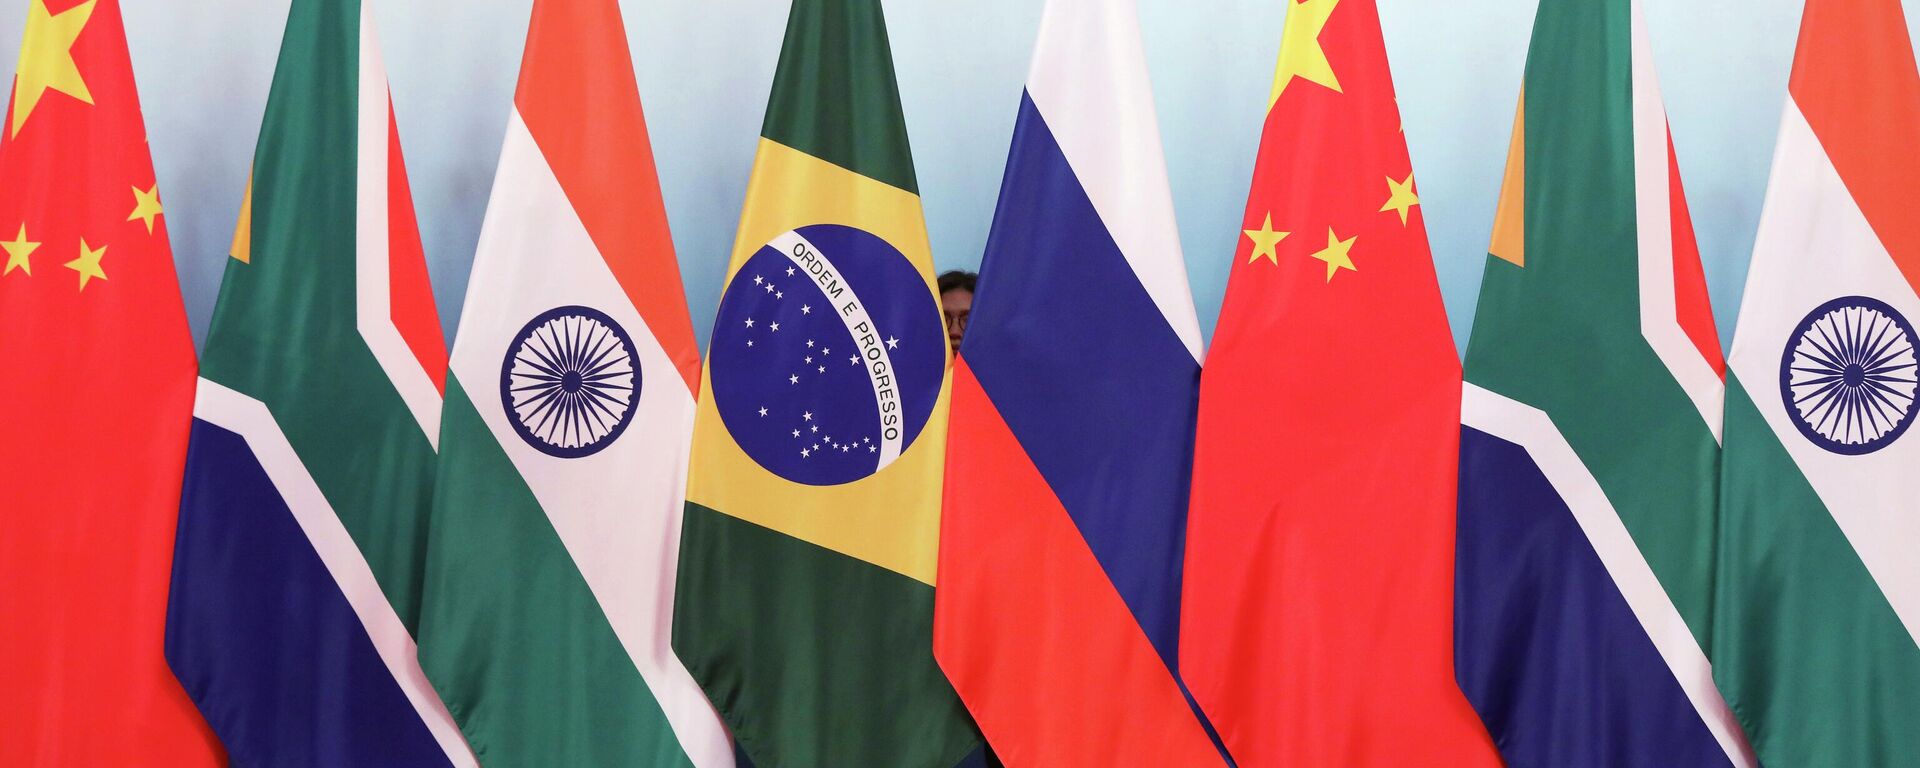 A worker stands behinds the flags of Brazil, Russia, China, South Africa and India to tidy the flags ahead of a group photo during the BRICS Summit at the Xiamen International Conference and Exhibition Center in Xiamen, southeastern China's Fujian Province, Monday, Sept. 4, 2017. - Sputnik International, 1920, 25.01.2023